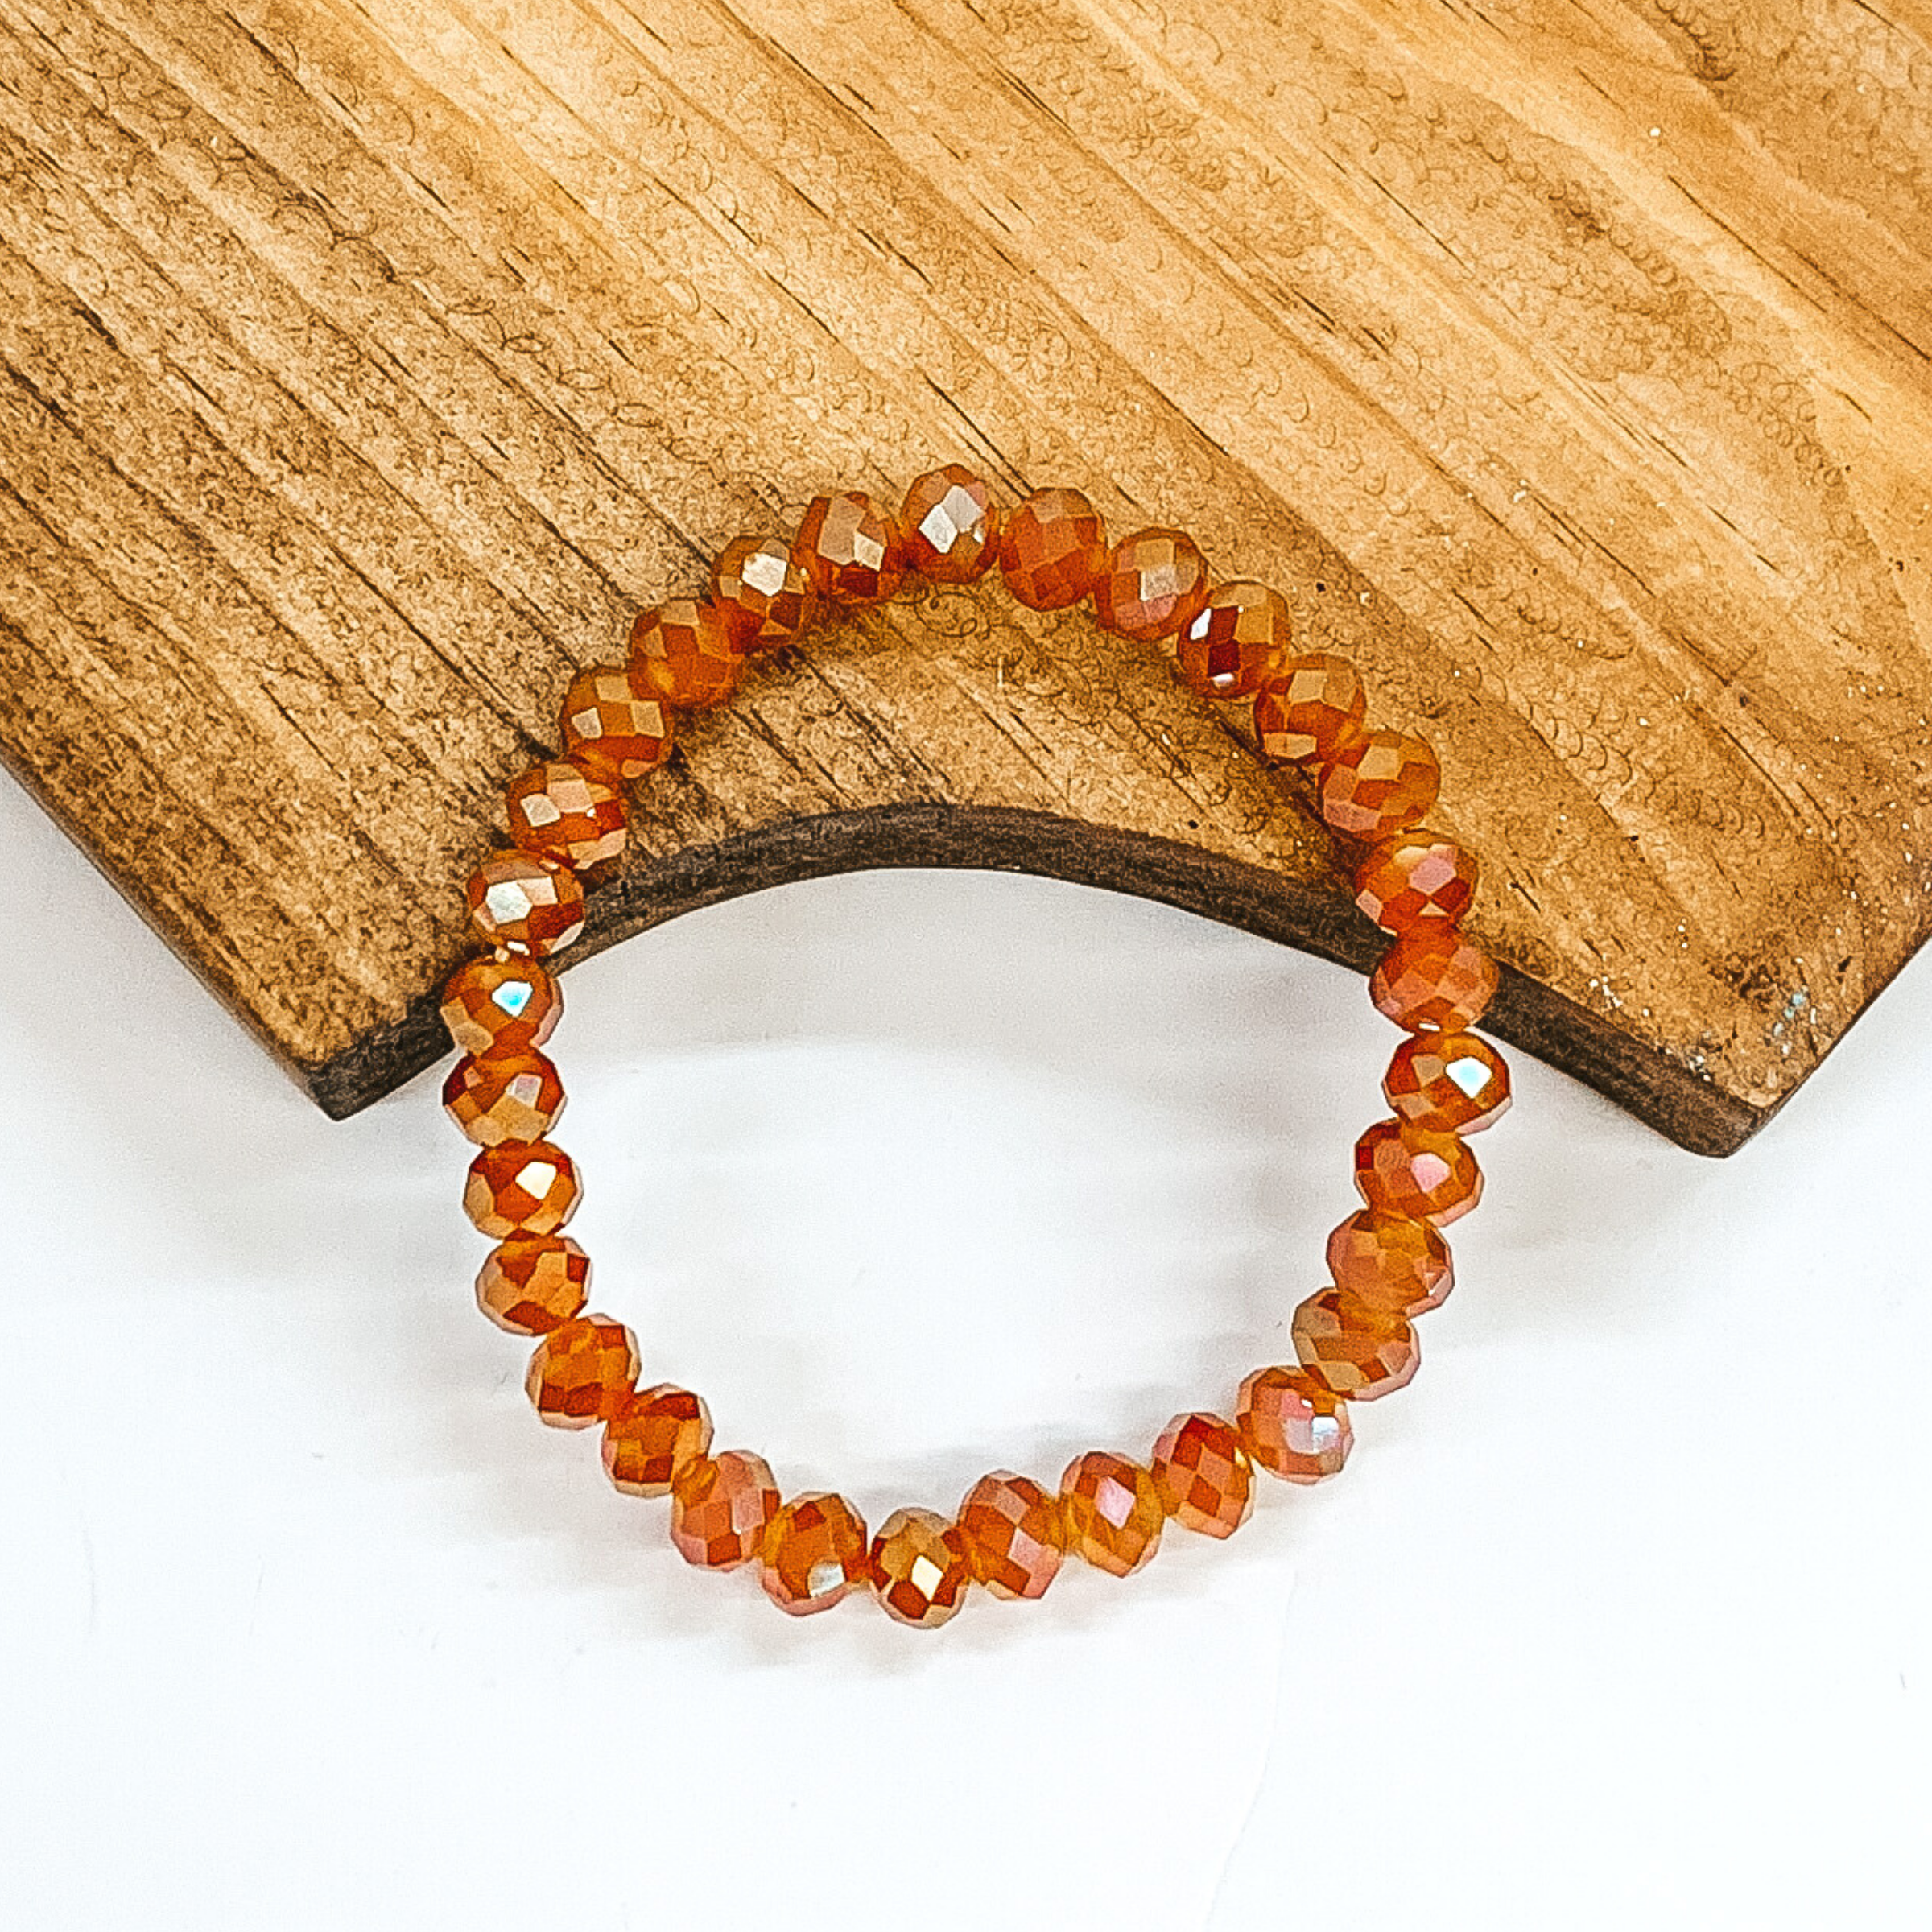 Crystal beaded bracelet in rust orange. This bracelet is pictured on a partially laying on a brown block on a white background.